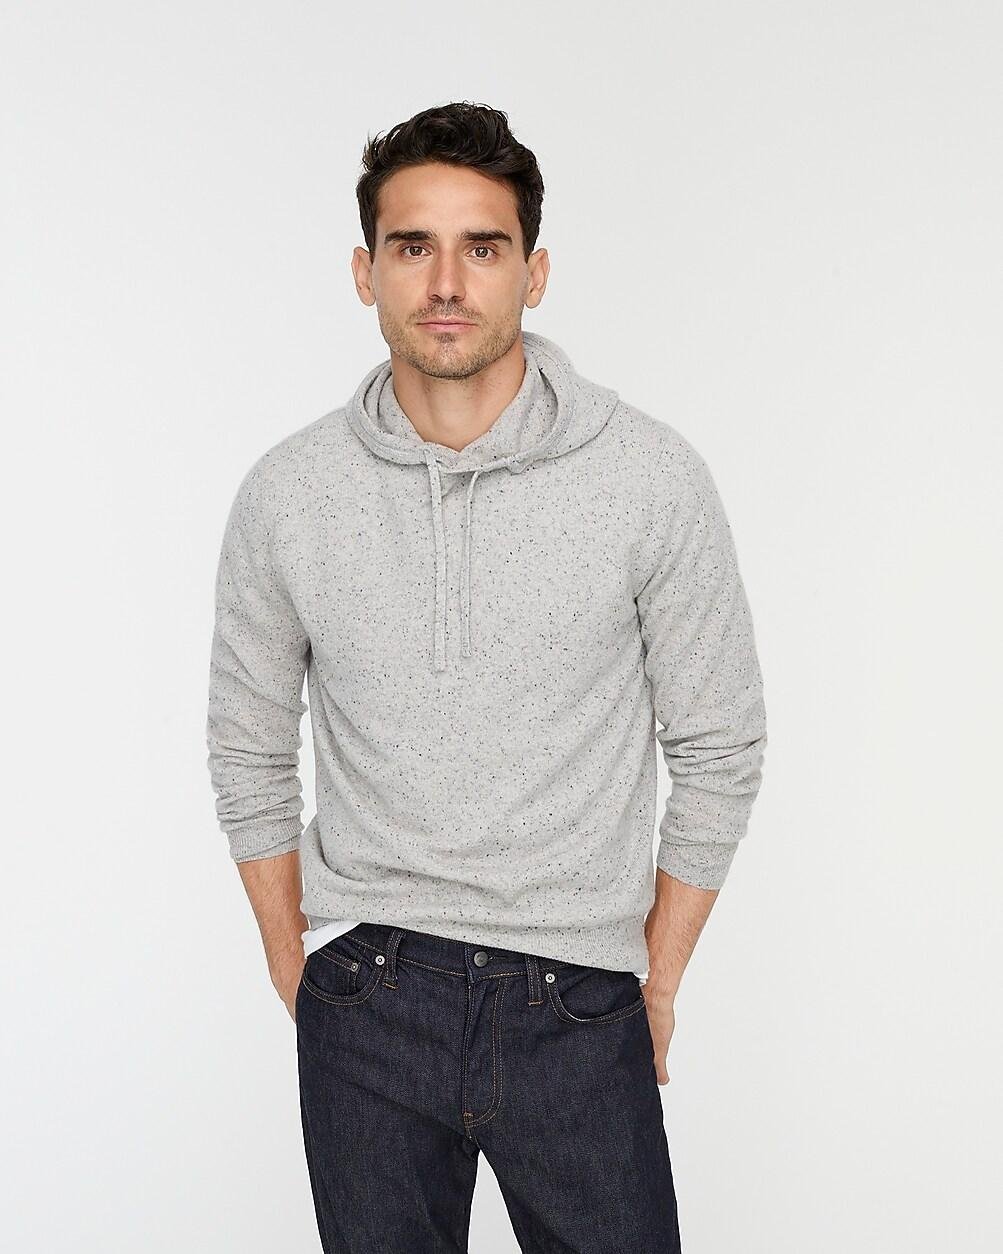 Cashmere donegal hoodie by J.CREW